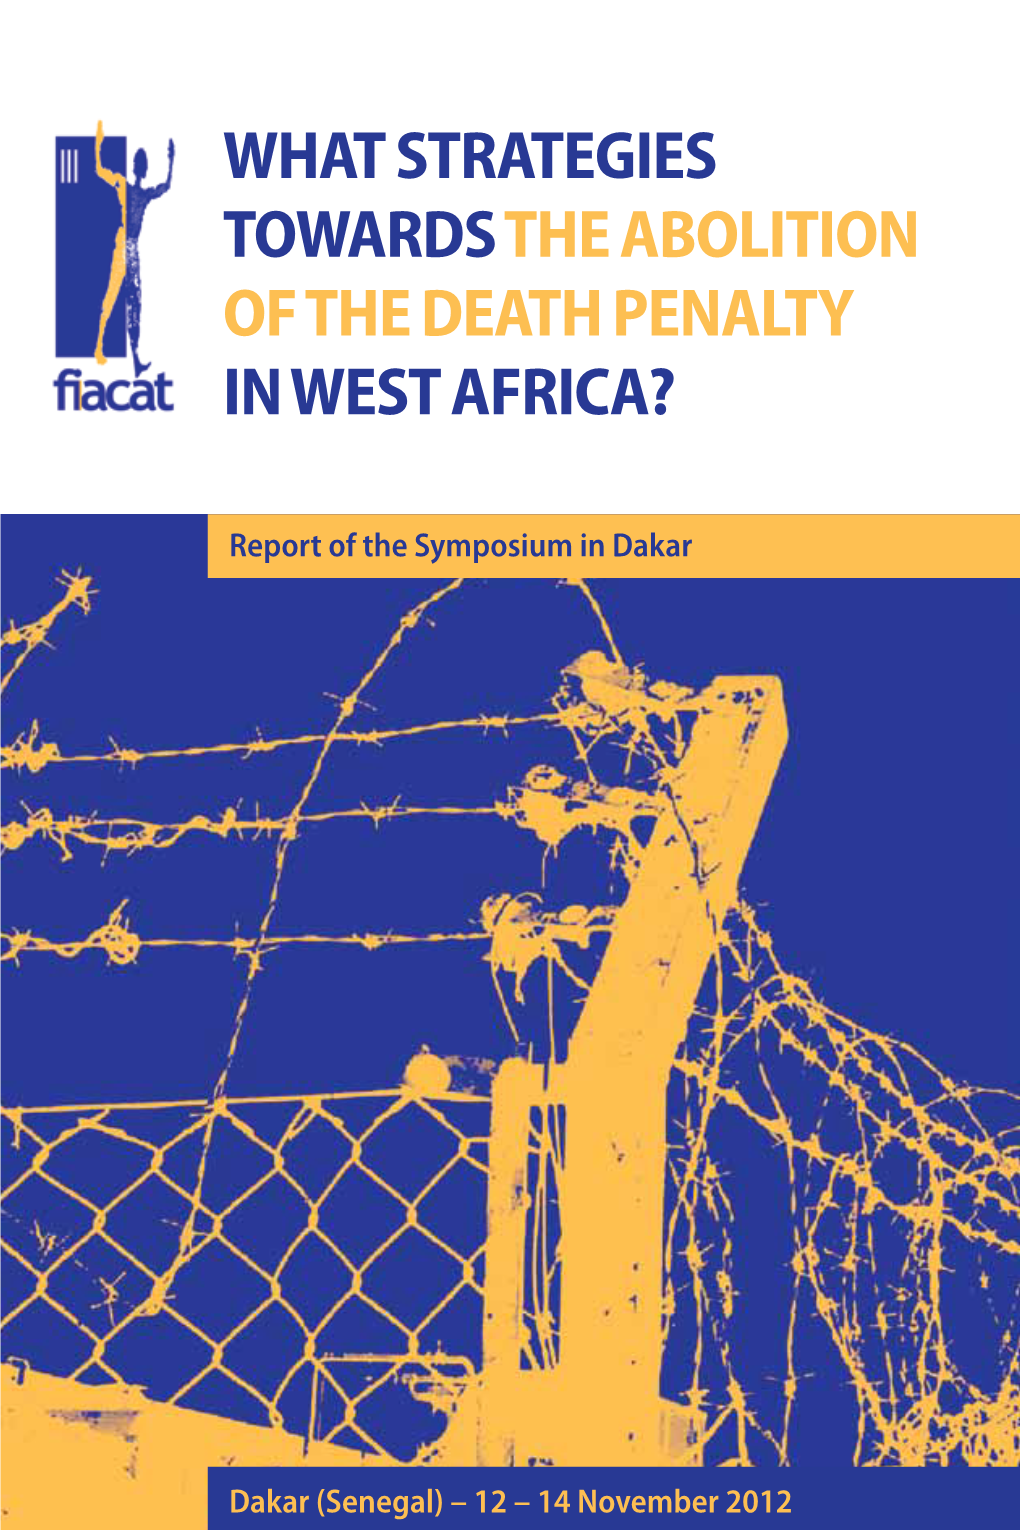 What Strategies Towards the Abolition of the Death Penalty in West Africa?